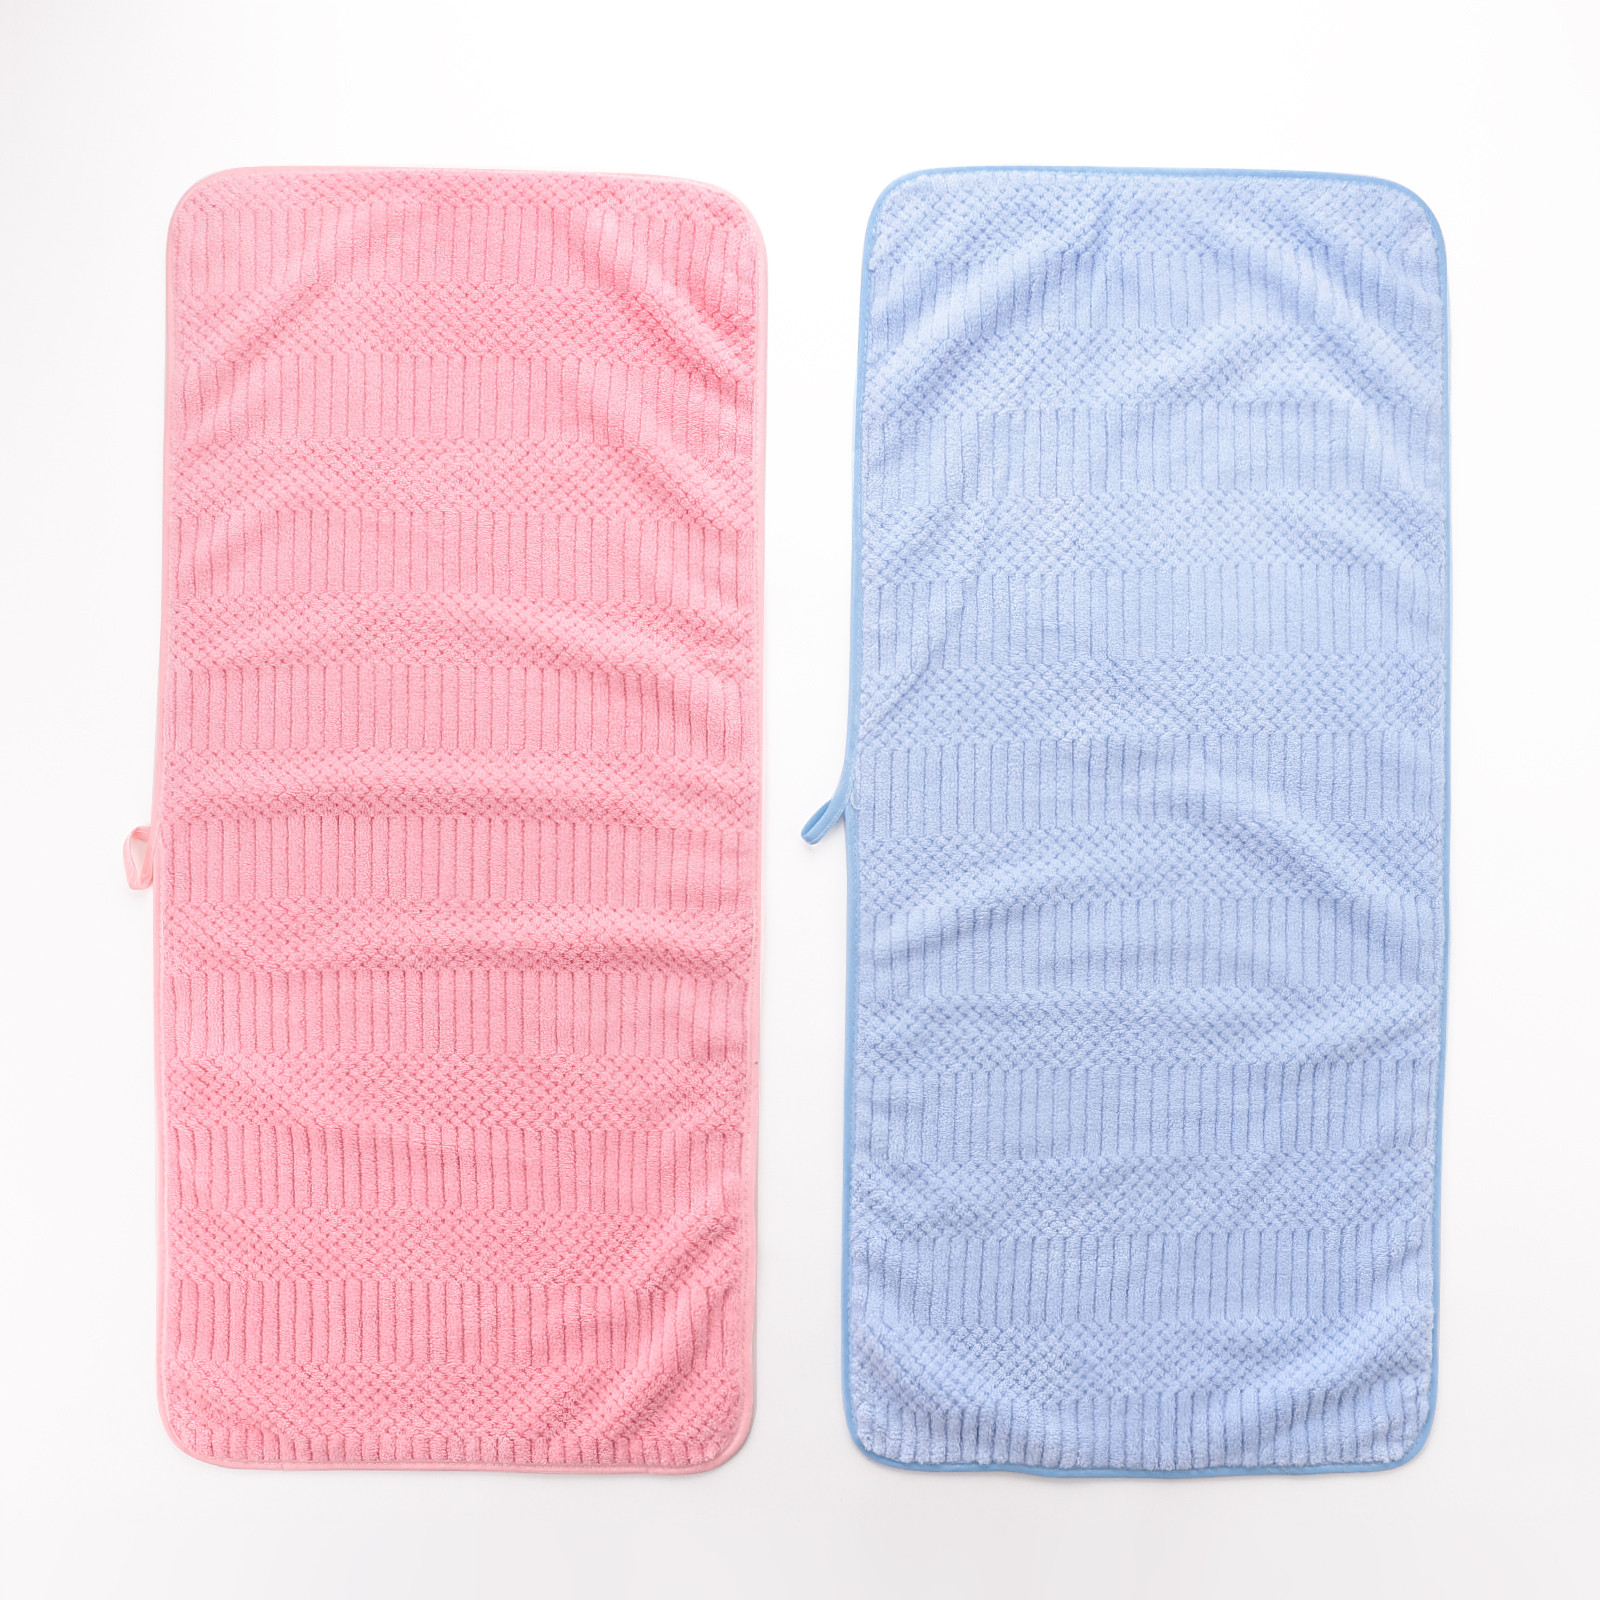 Kuber Industries 2 Piece Hand Towel Set|280 GSM|Gtm & Workout Towels|Super Absorbent & Antibacterial Treatment|Small Size, Travel Friendly  (Blue & Pink)